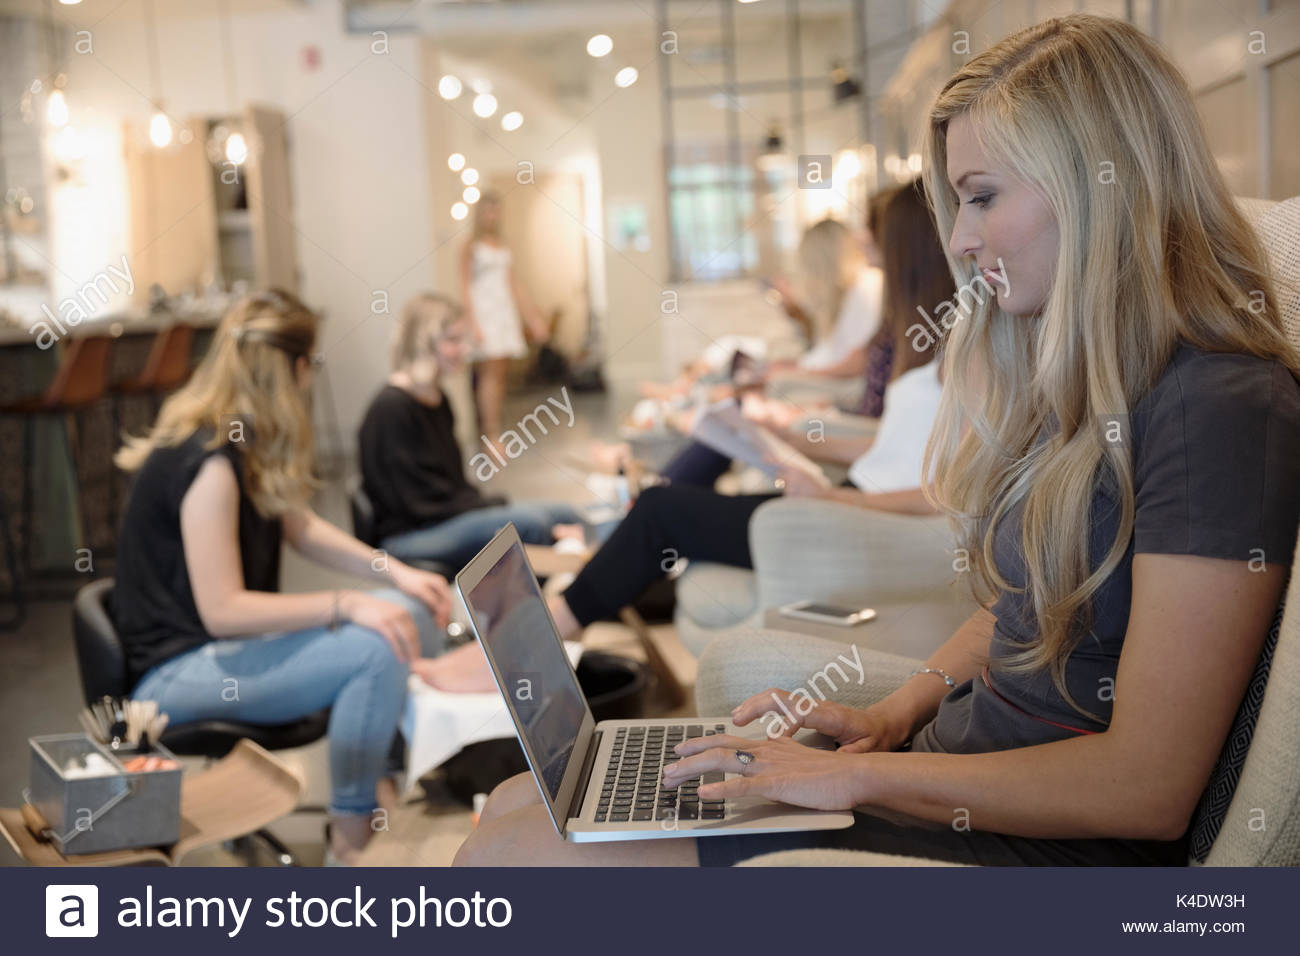 Woman getting pedicure and working at laptop in nail salon Stock Photo